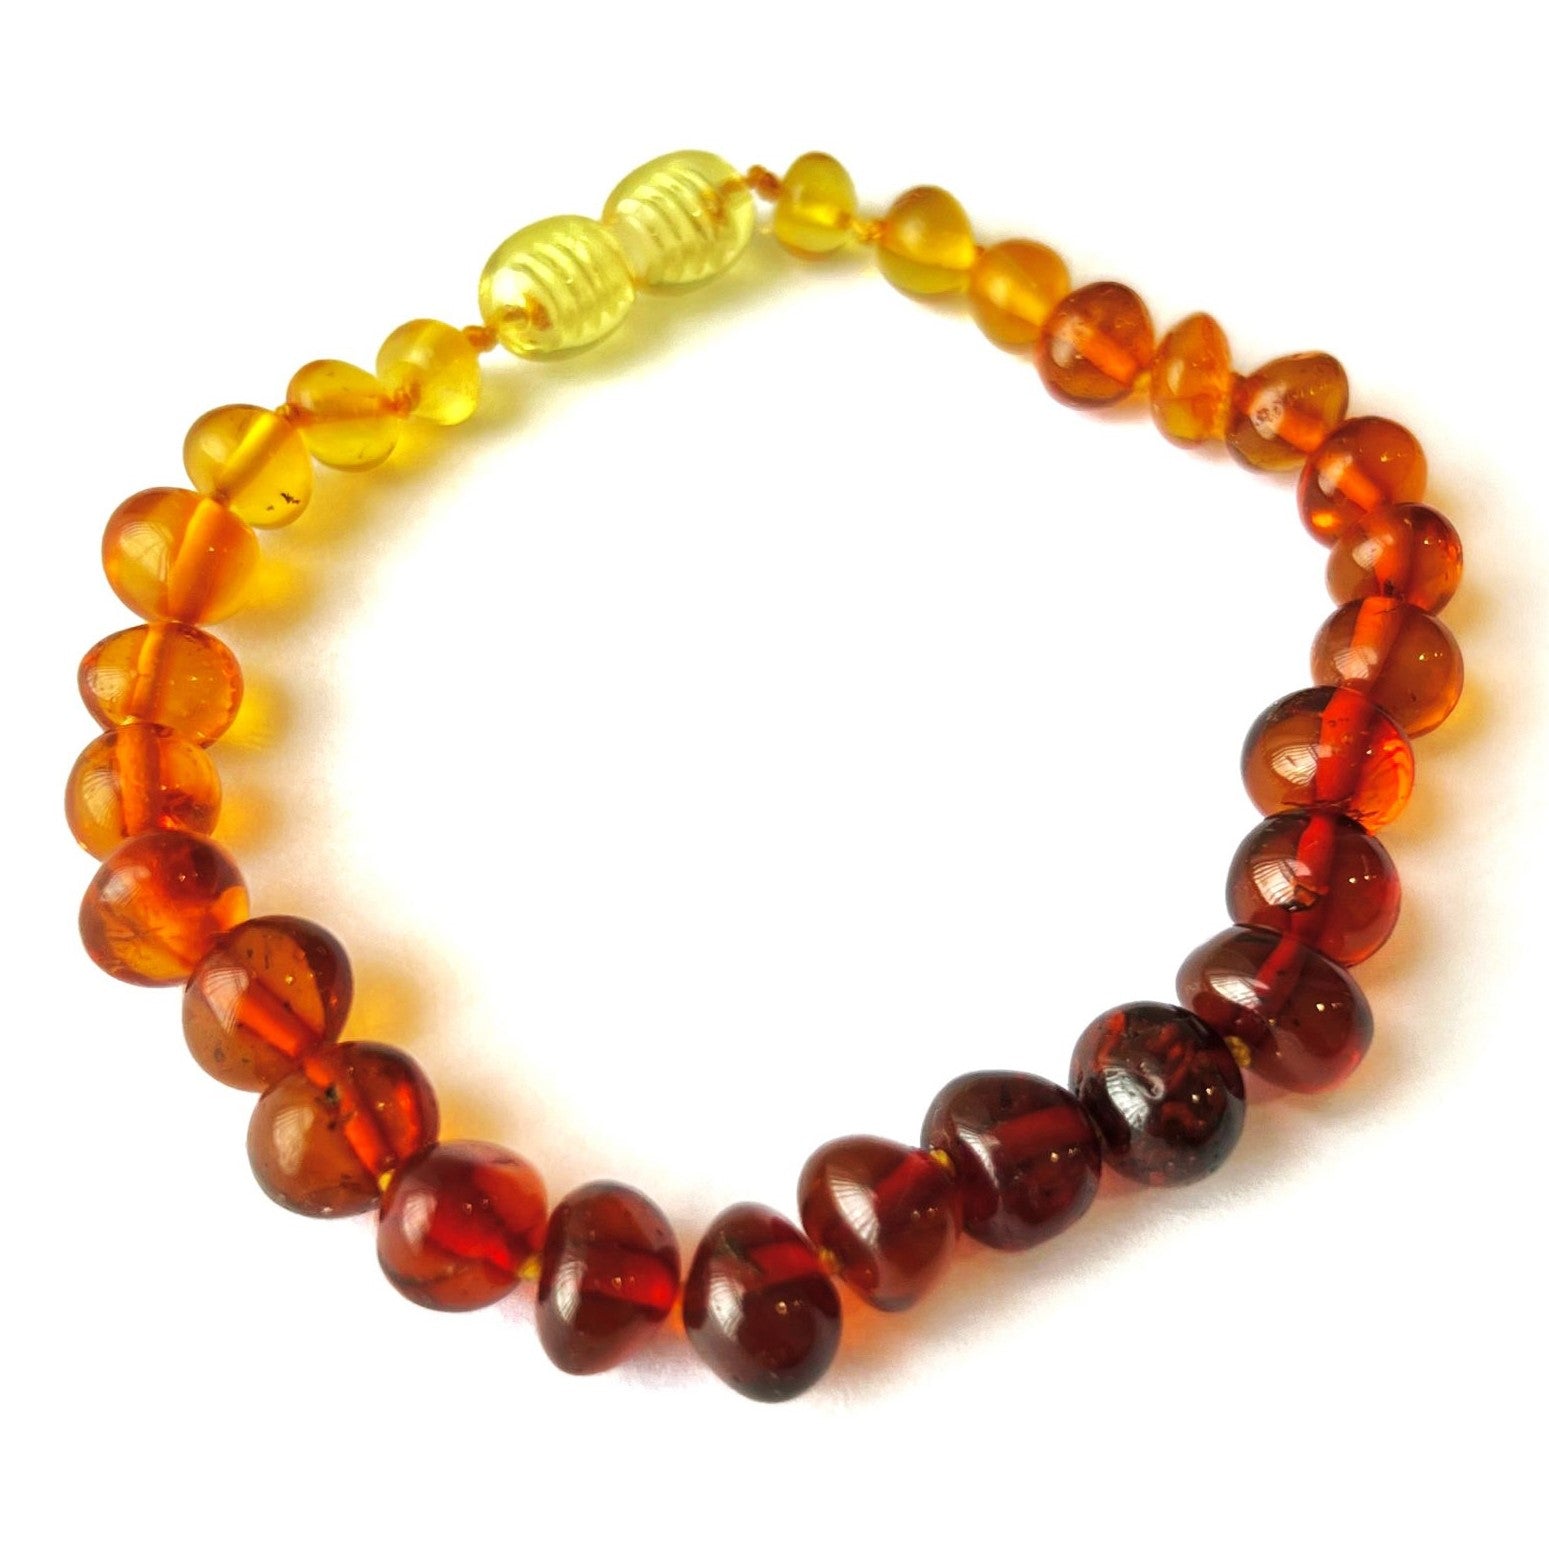 100% Genuine Baltic Amber Beautiful Baroque Bracelets in Ombre colours - BAROMBB